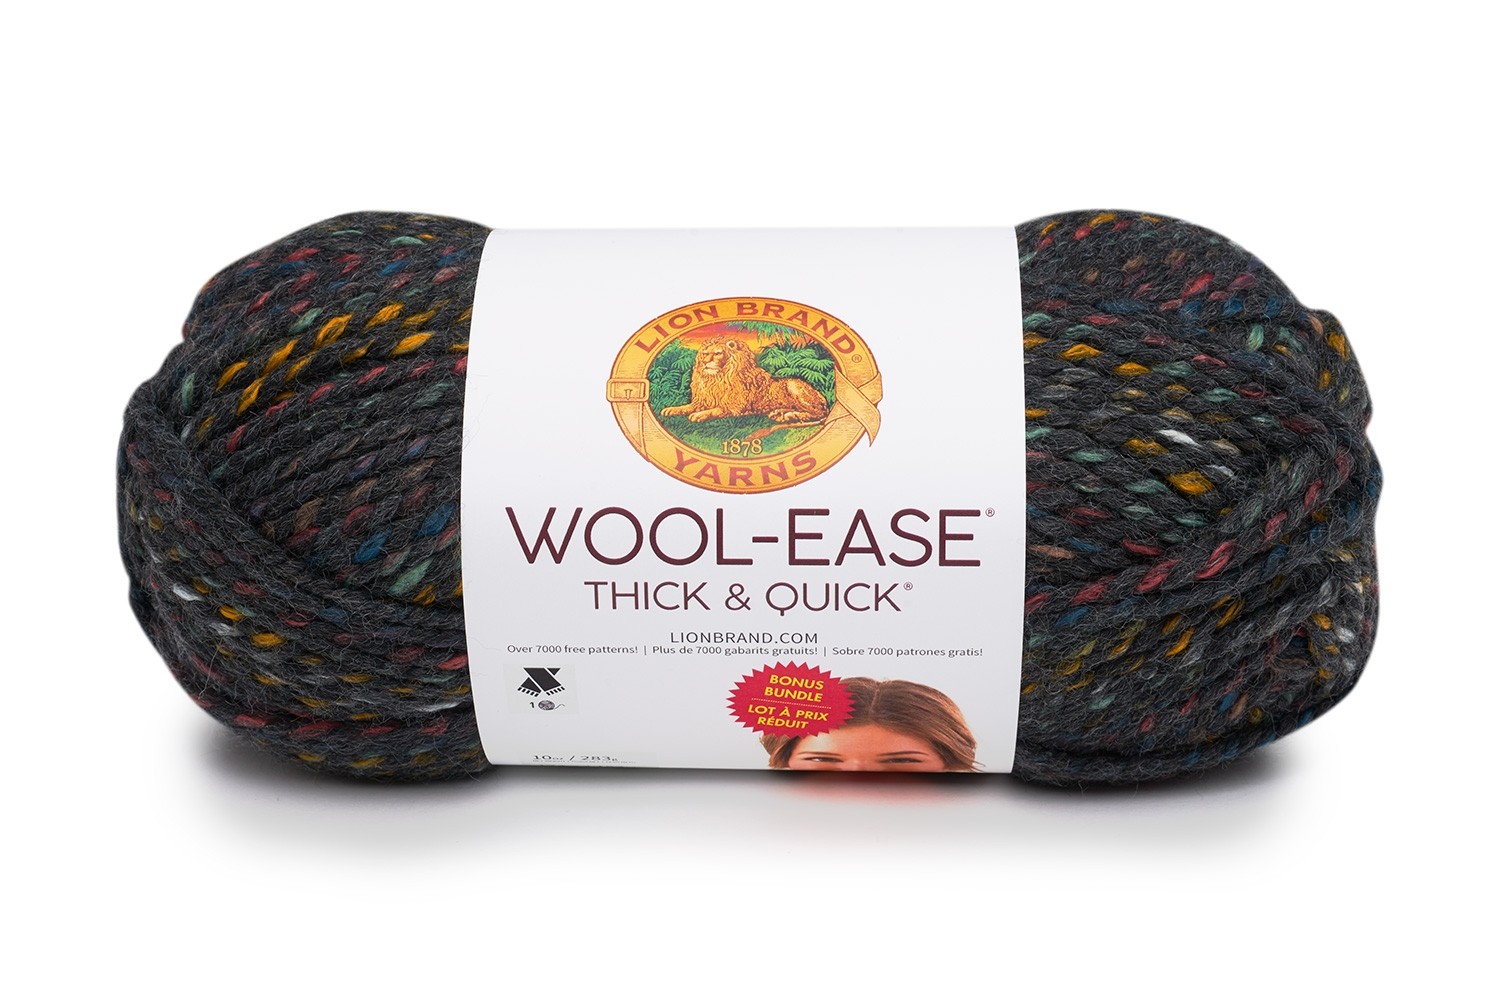 Wool-Ease Thick and Quick Patterns - Free Crochet Patterns